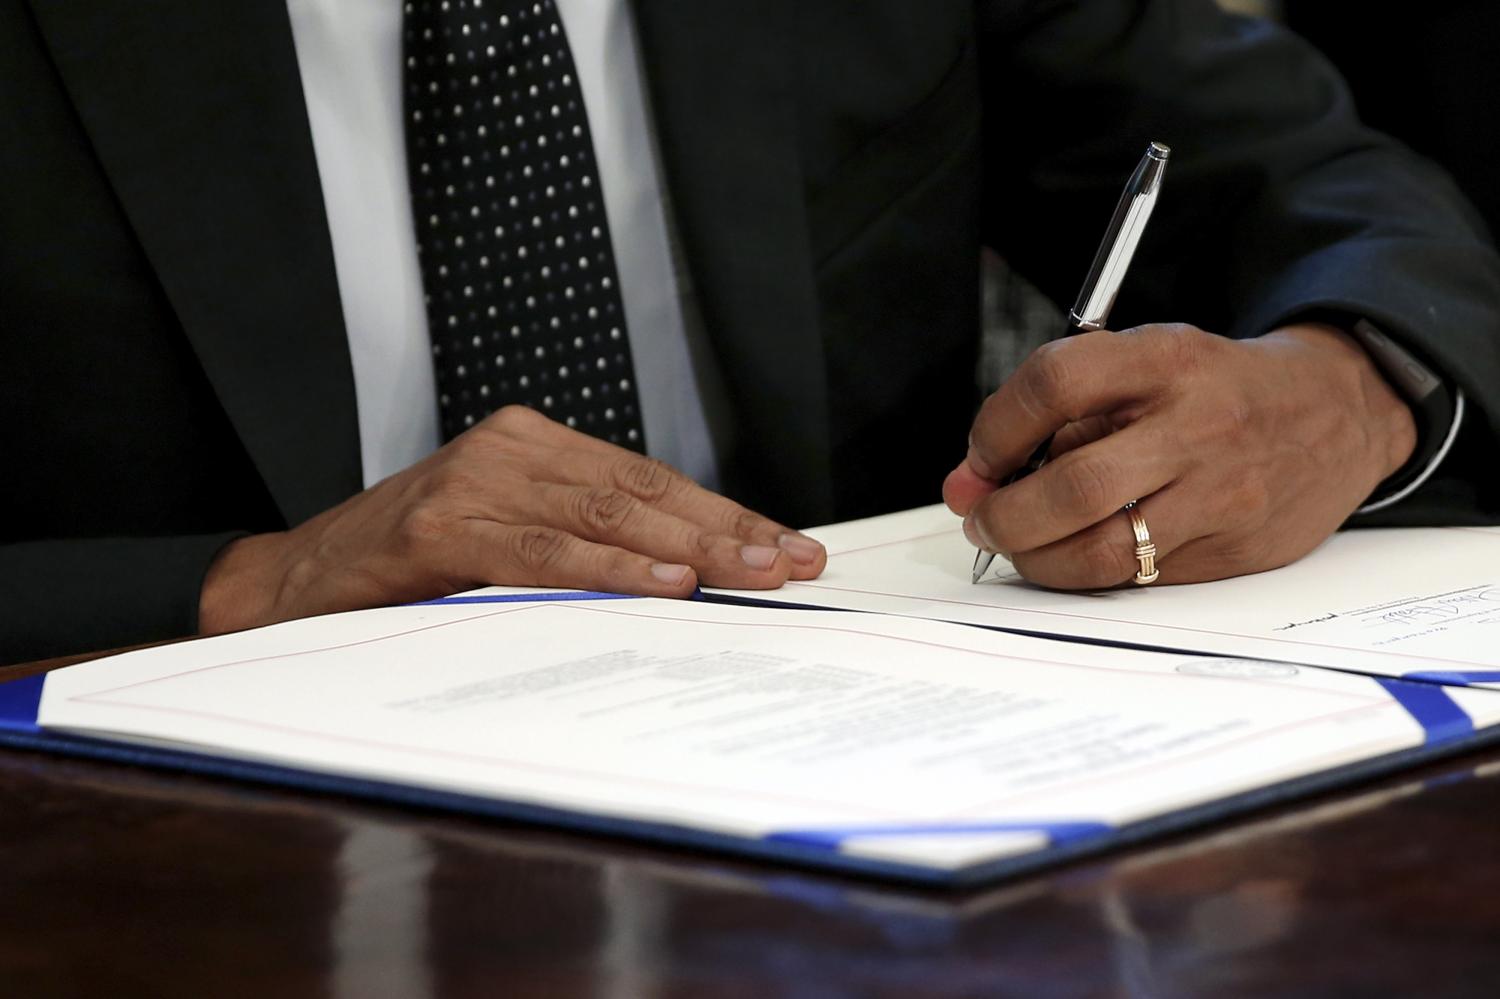 U.S. President Barack Obama signs the Sawtooth National Recreation Area and Jerry Peak Wilderness Additions Act into law at his desk in Oval Office at the White House in Washington August 7, 2015. The law sets aside 275,665 acres (1,116 square km) of Idaho's Boulder-White Clouds Wilderness to be permanently protected from development.  REUTERS/Jonathan Ernst - GF20000016915